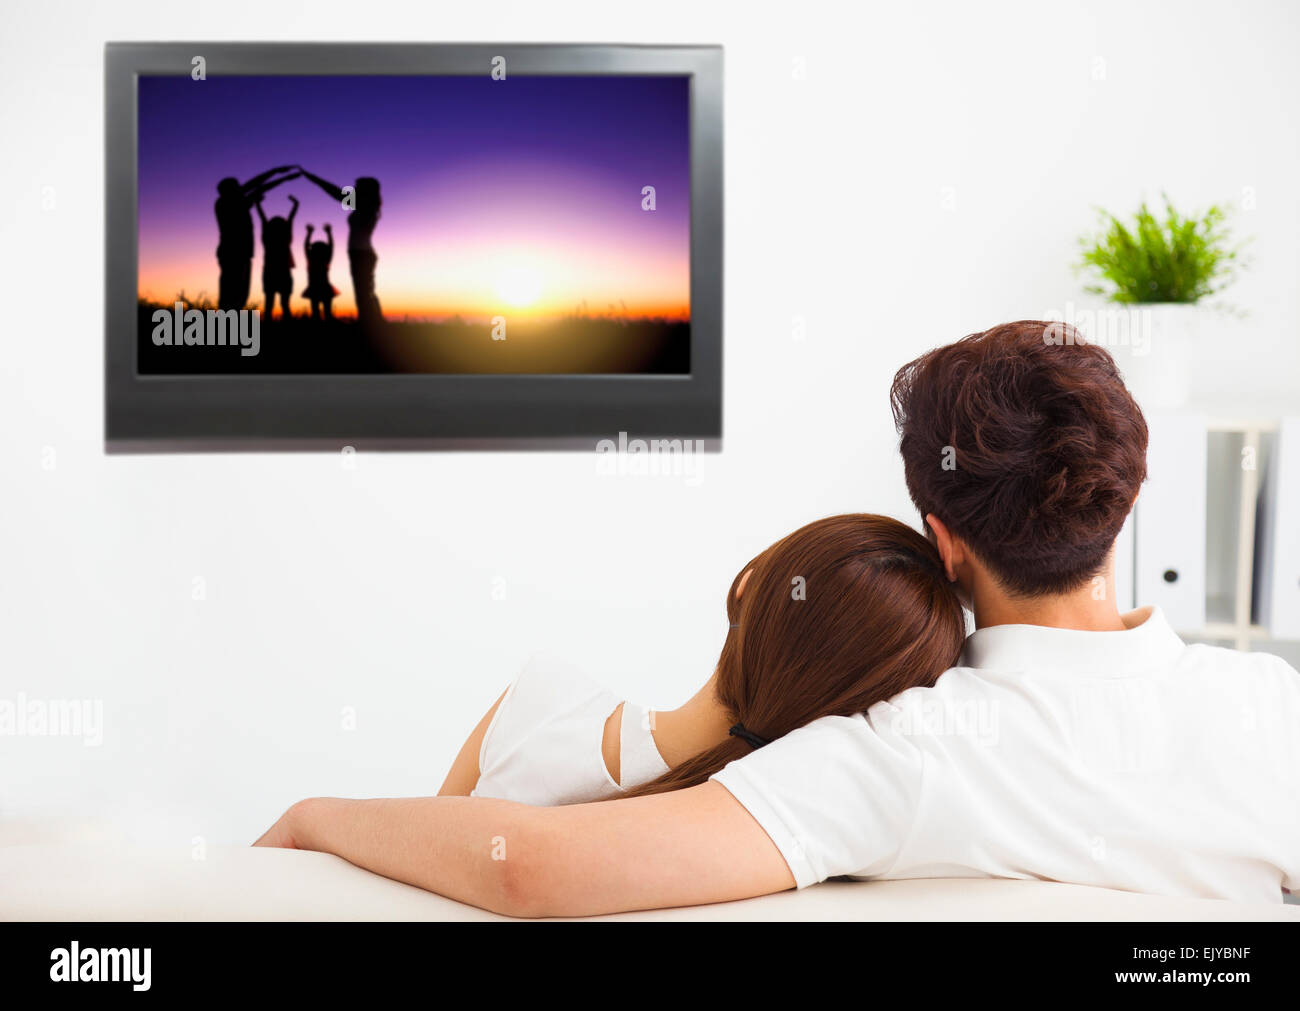 young couple watching the family concept tv show Stock Photo